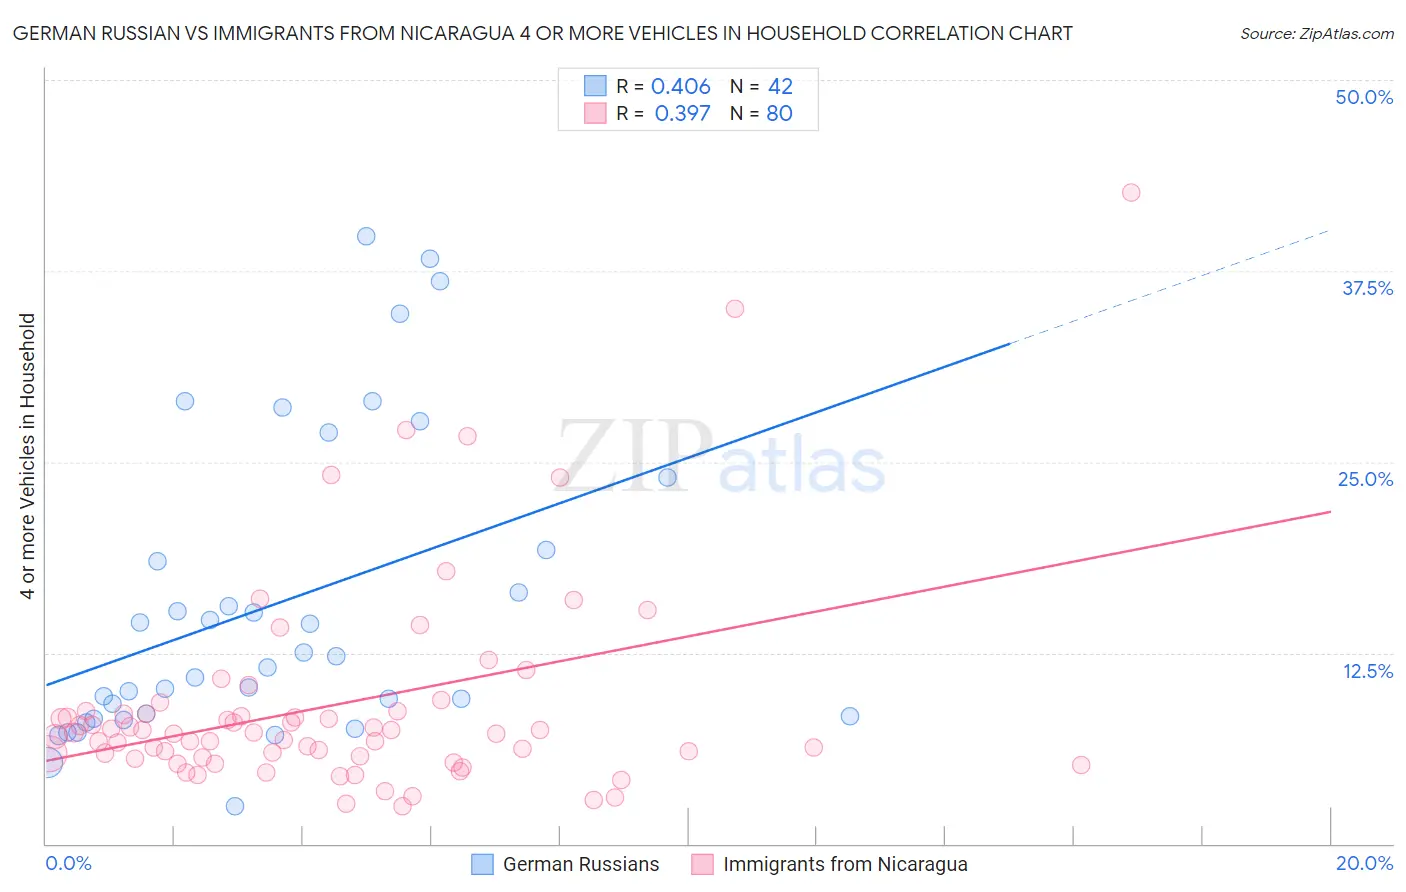 German Russian vs Immigrants from Nicaragua 4 or more Vehicles in Household